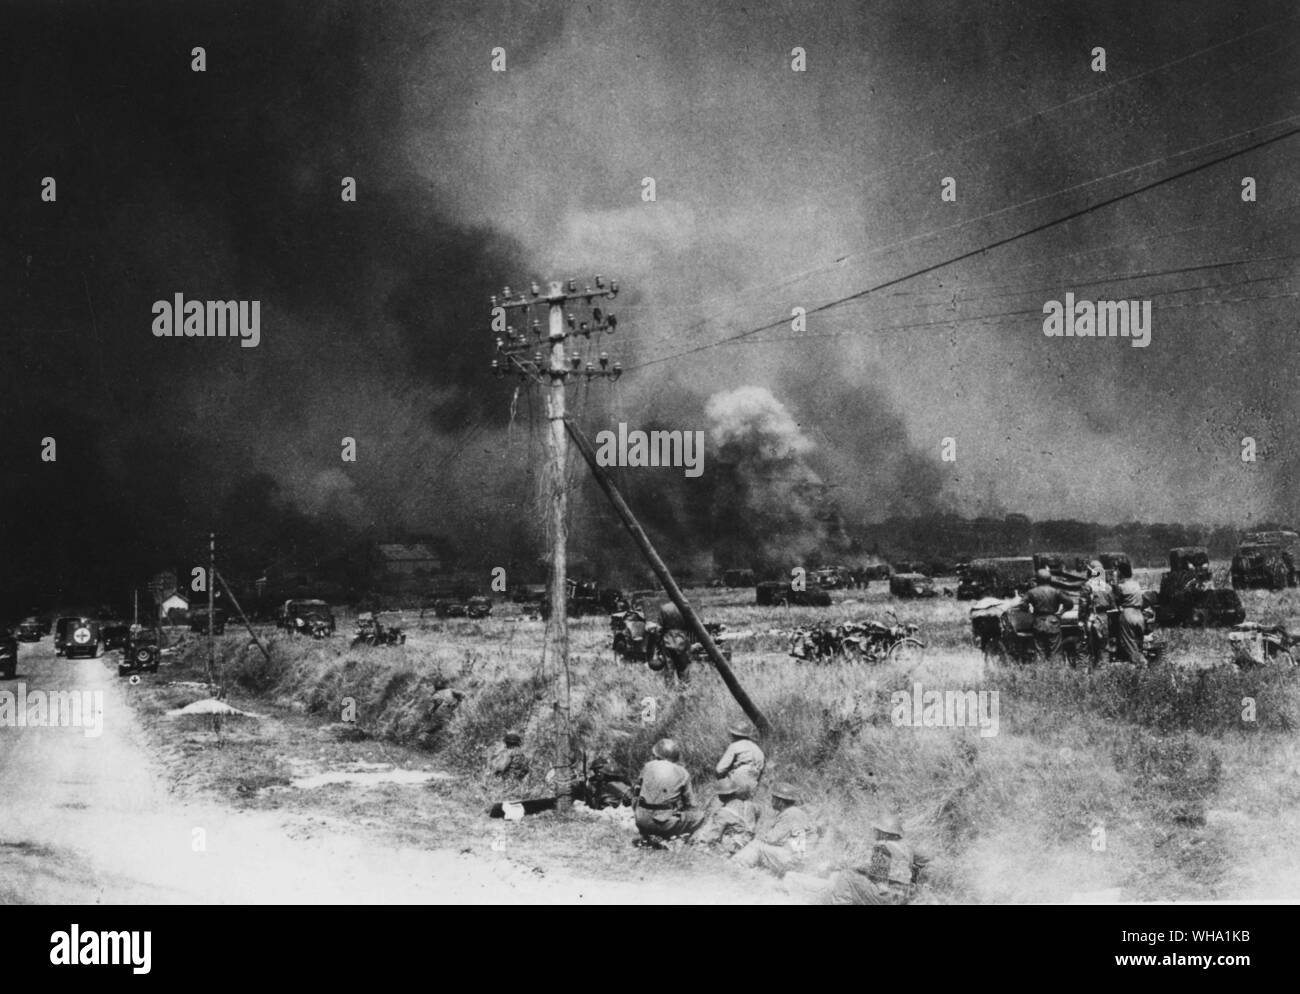 WW2: Advance by Canadian Army with British troops towards Falaise, France. Photo shows fires caused by bombing with transport and men taking cover on Caen-Falaise road. 11th August 1944. Stock Photo